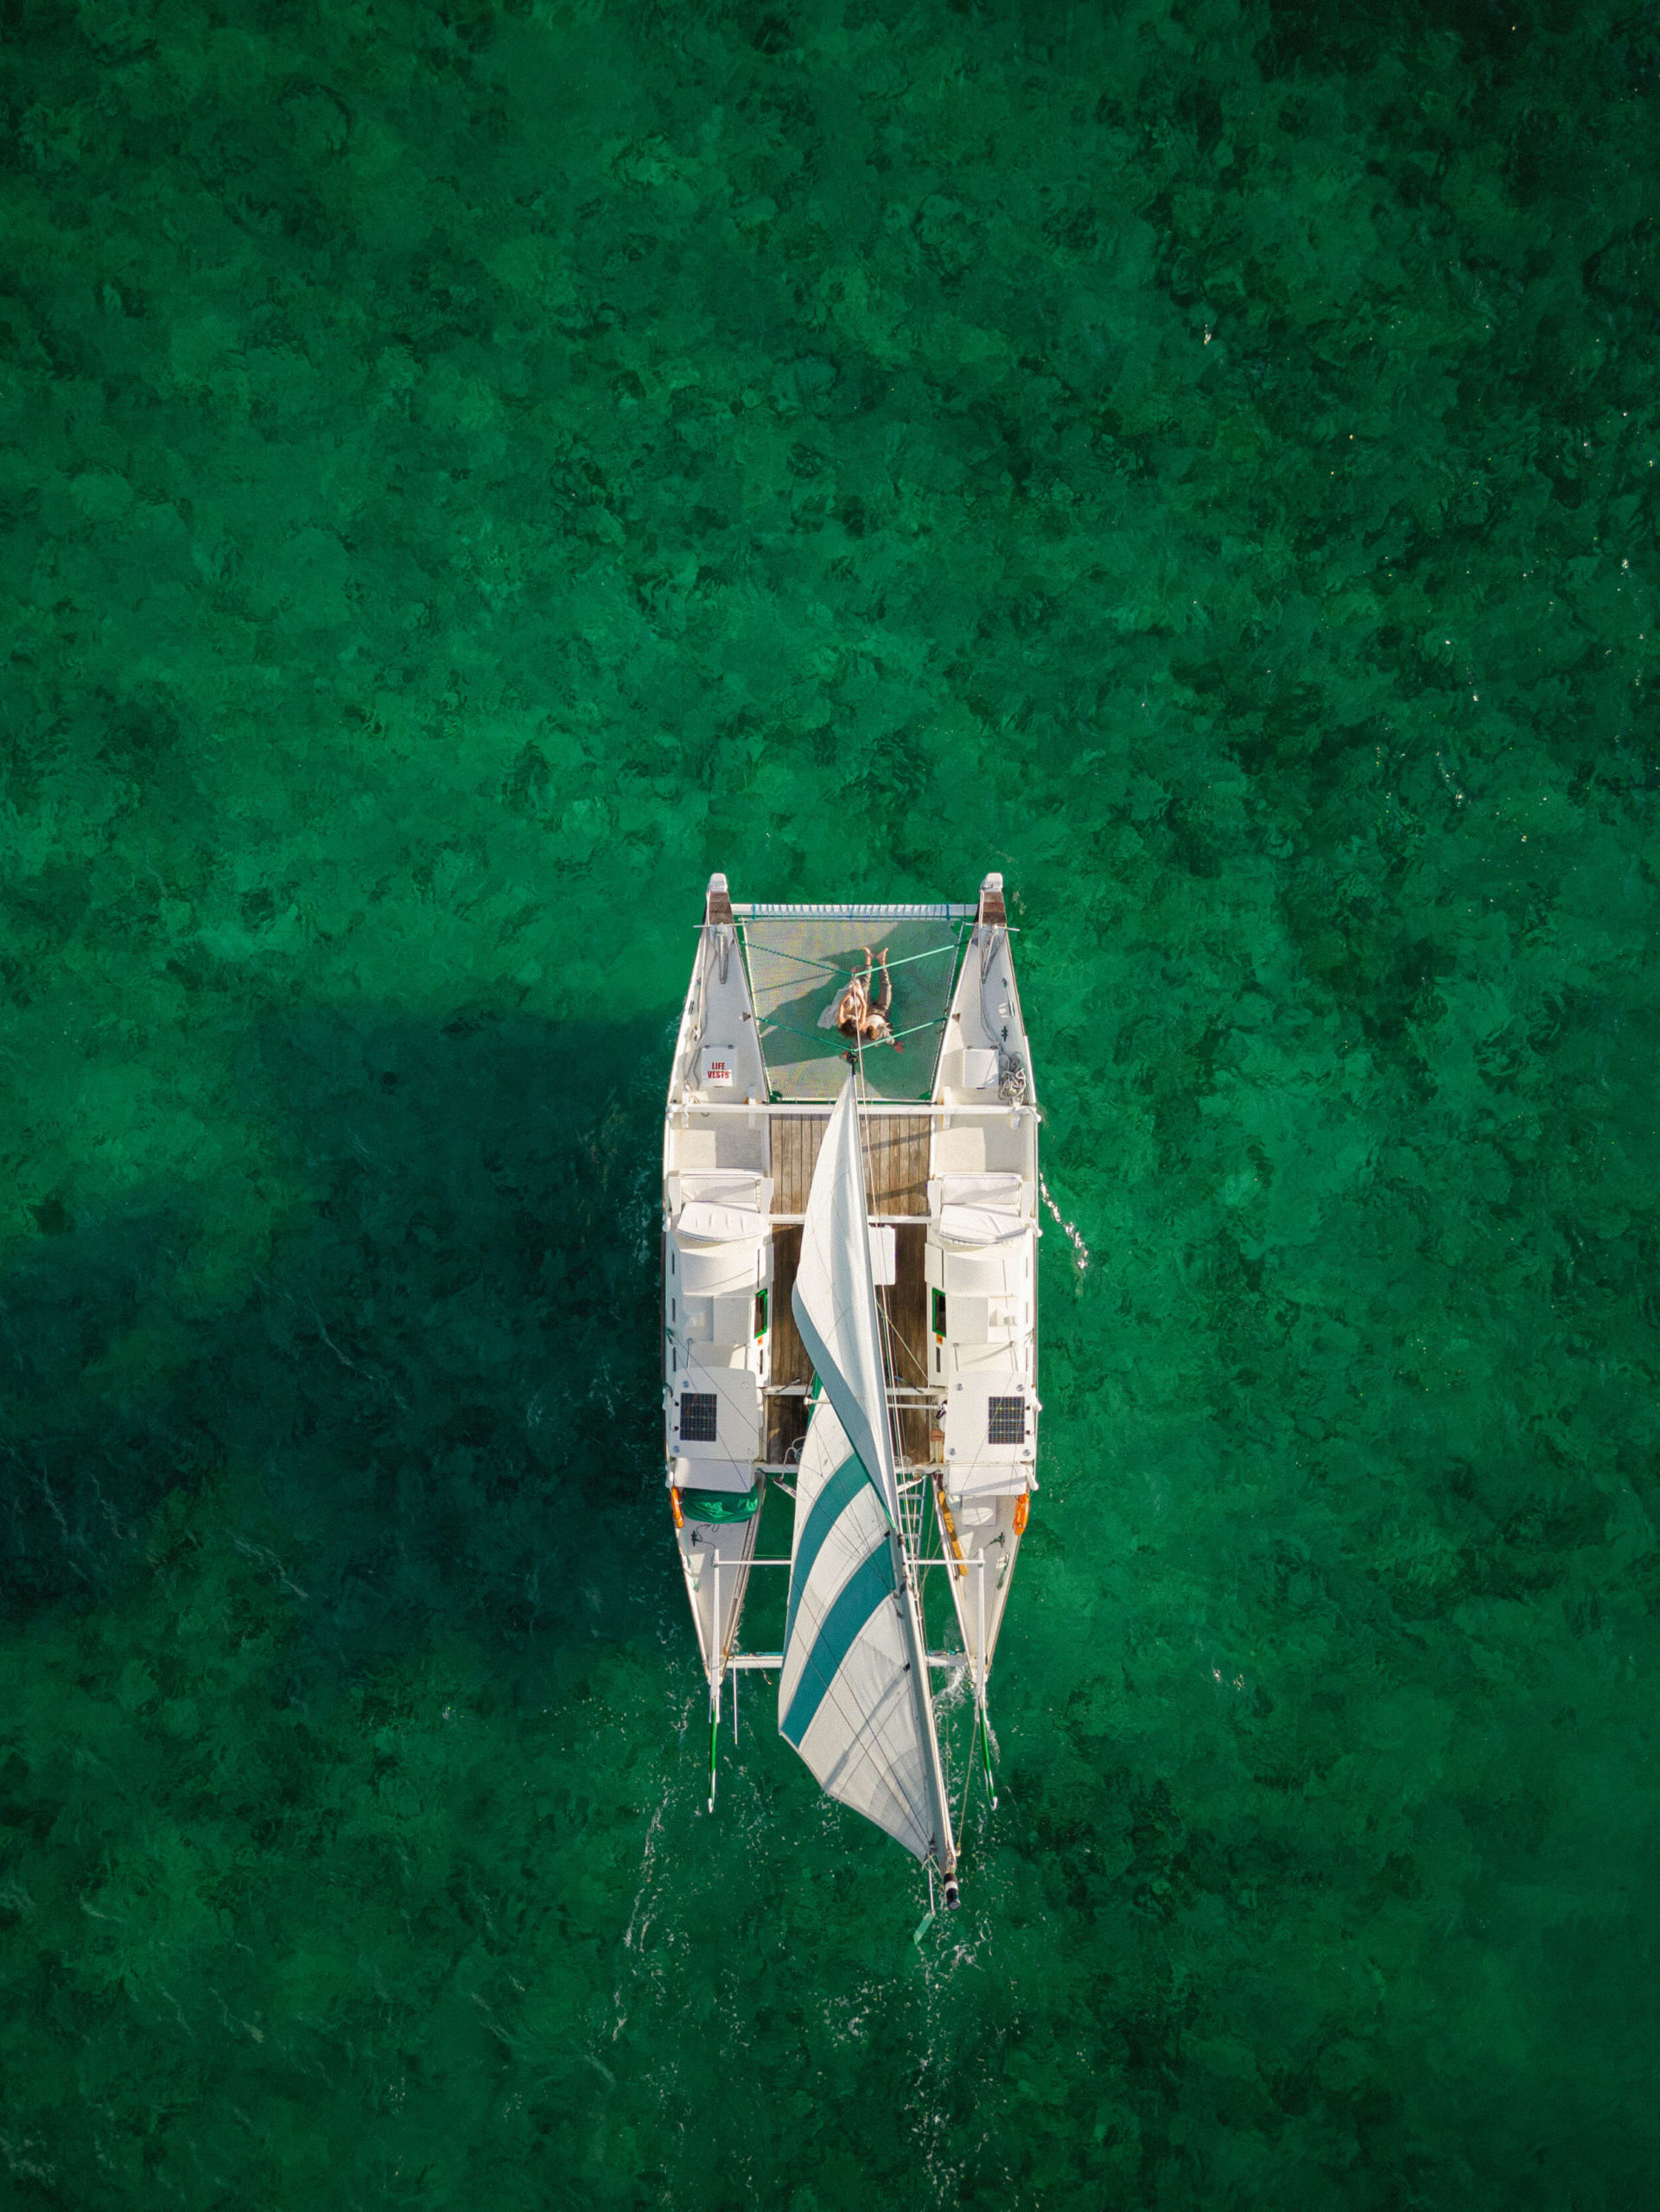 Aerial shot of a boat on the water